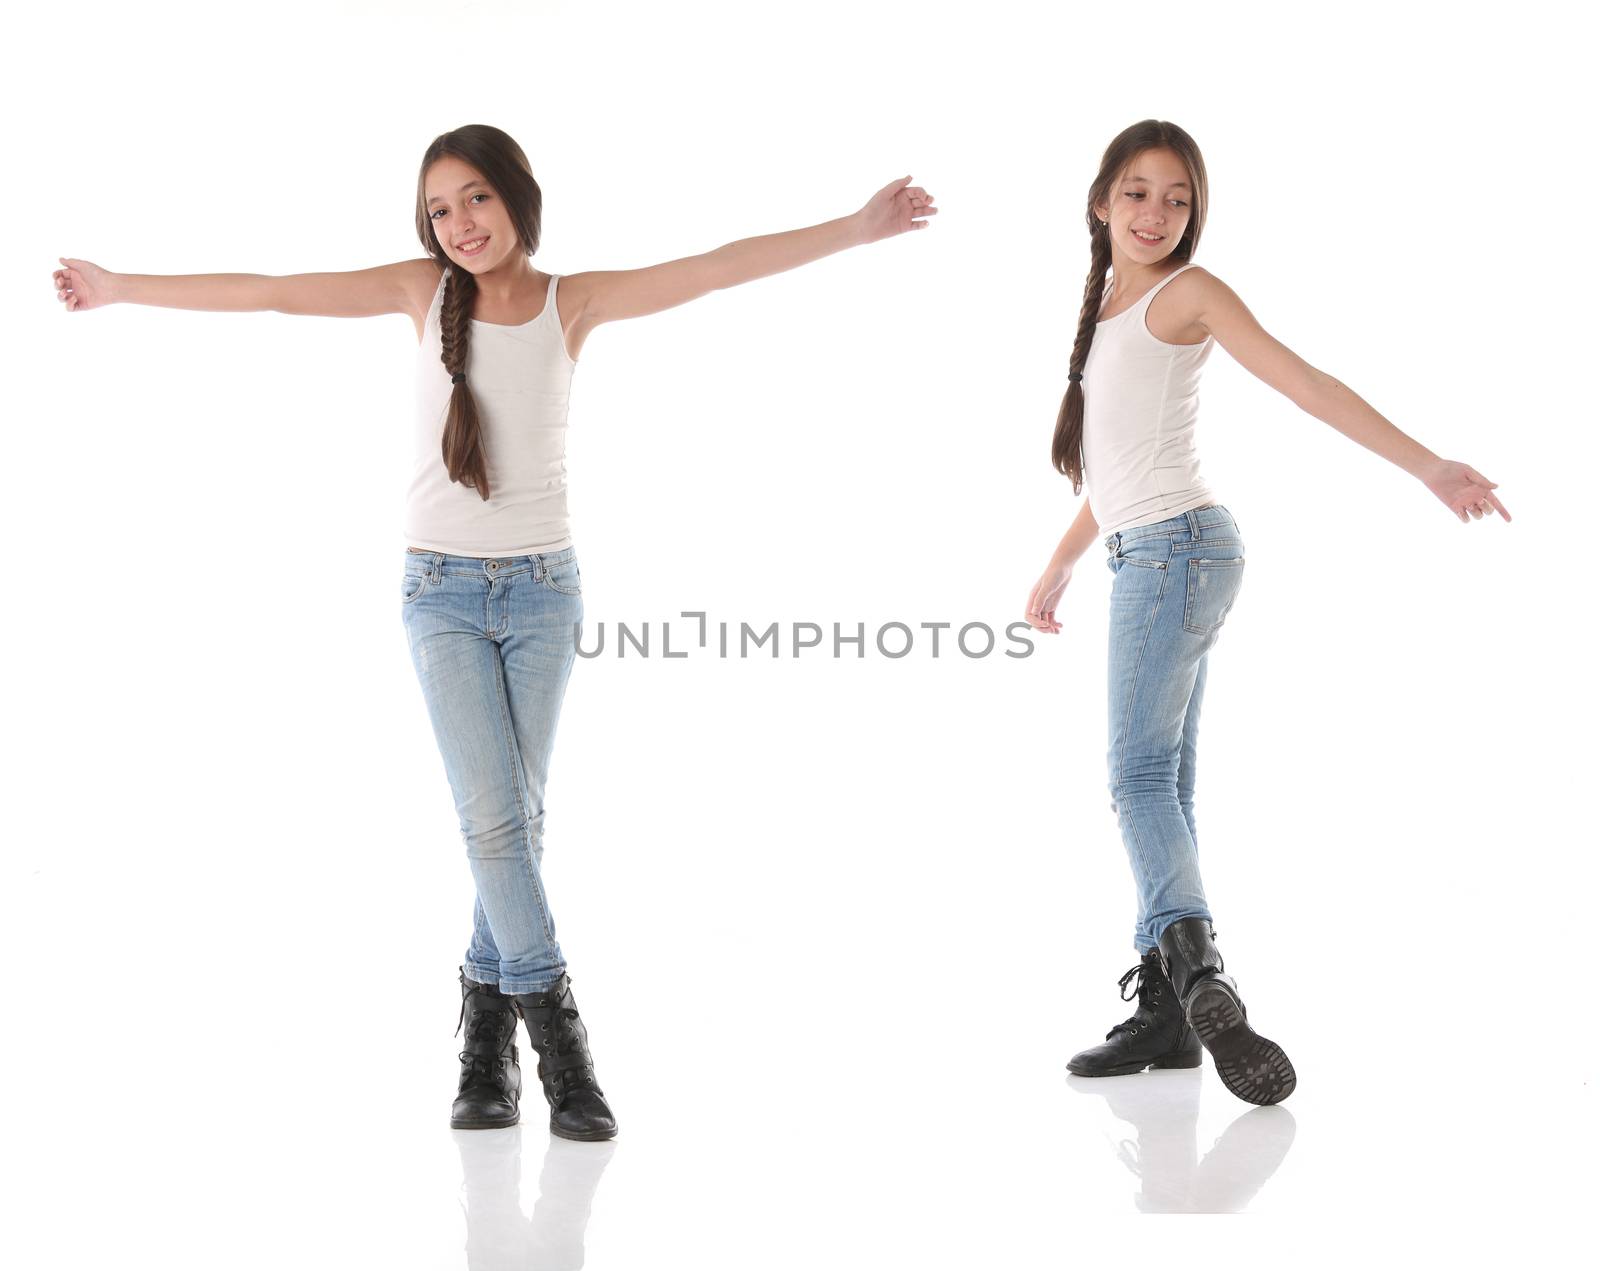 Collage of a lovely young girl doing a happy dance. Isolated on white background